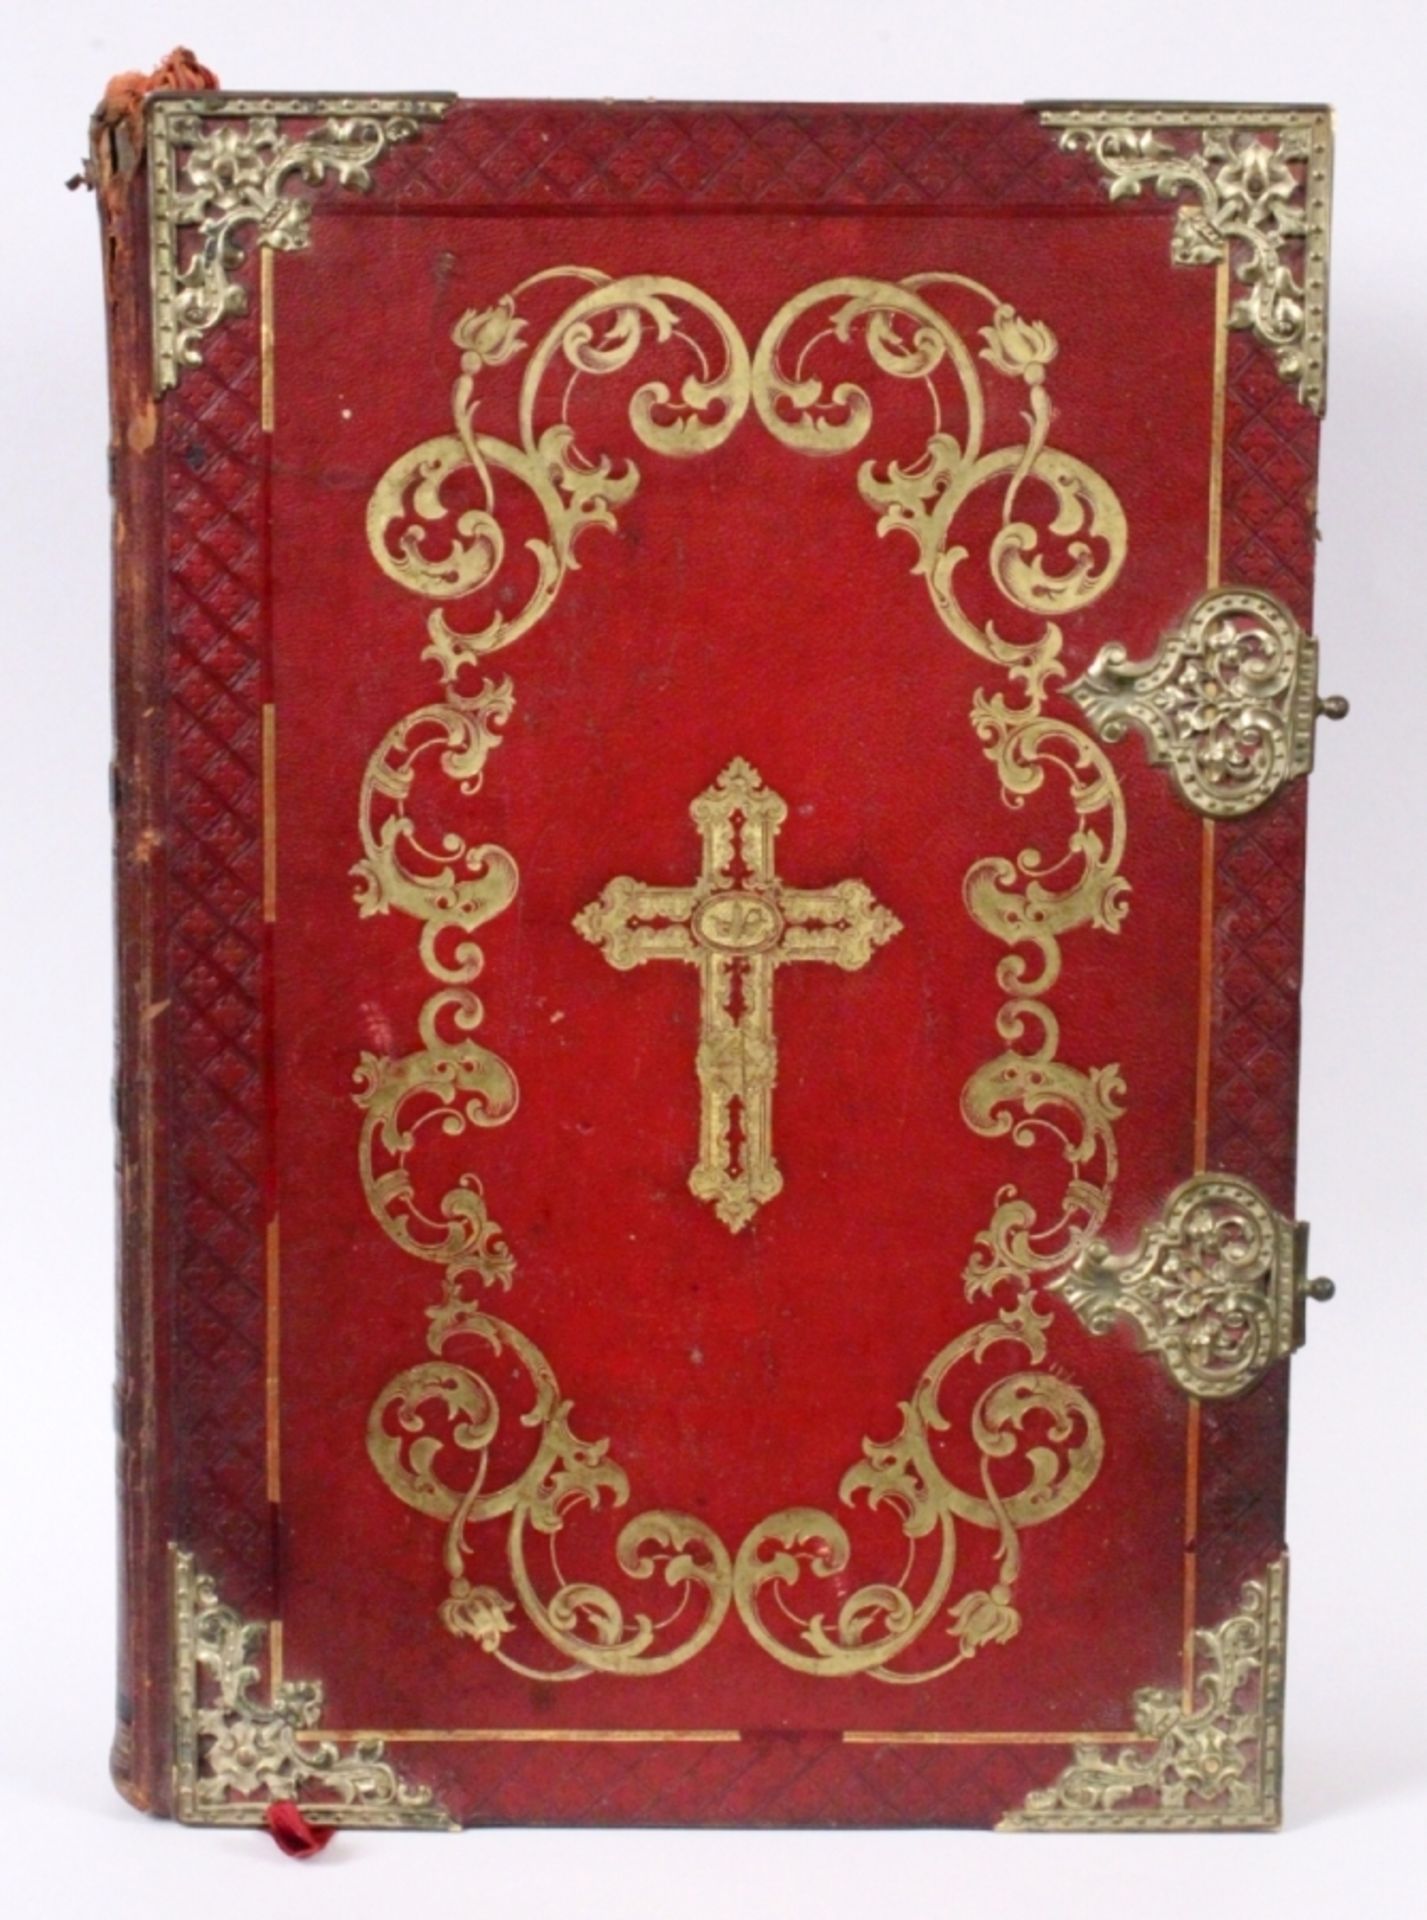 Opening: 120 EUR    MISSALE ROMANUM (Roman Missal) 1863 Pomp edition with red leather binding,